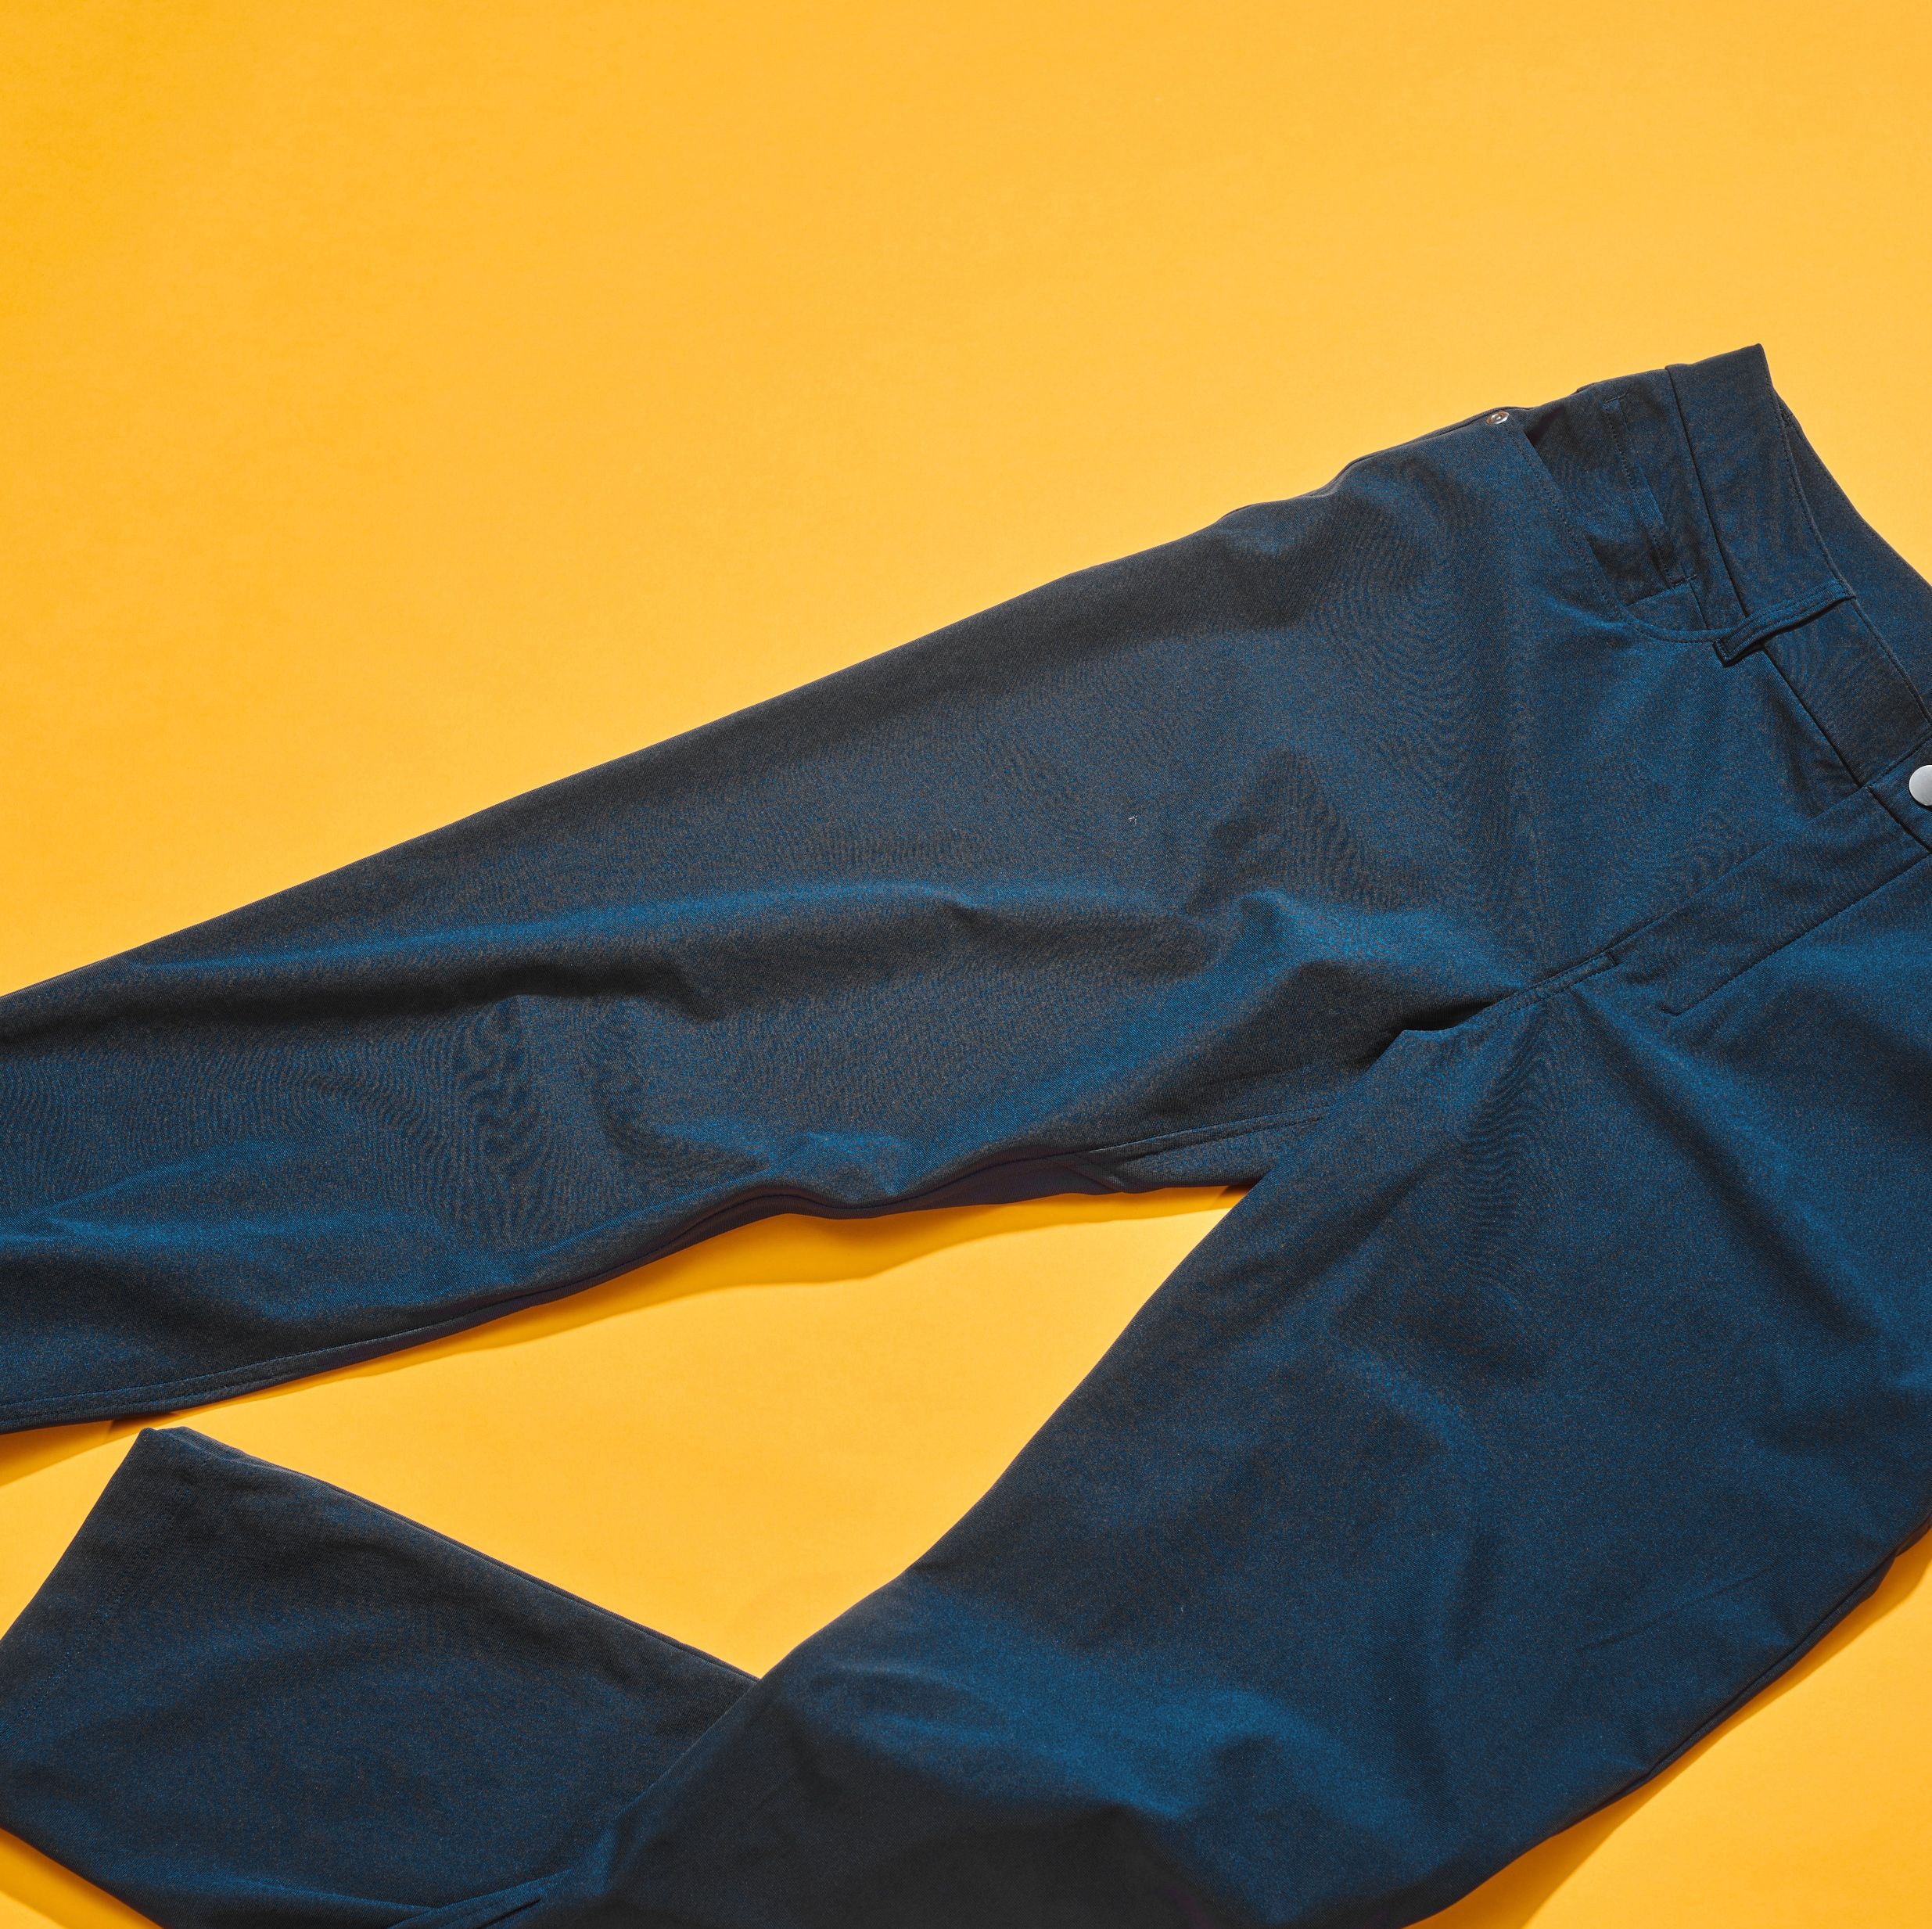 Lululemon's ABC Pants Are a Cult Classic for a Reason